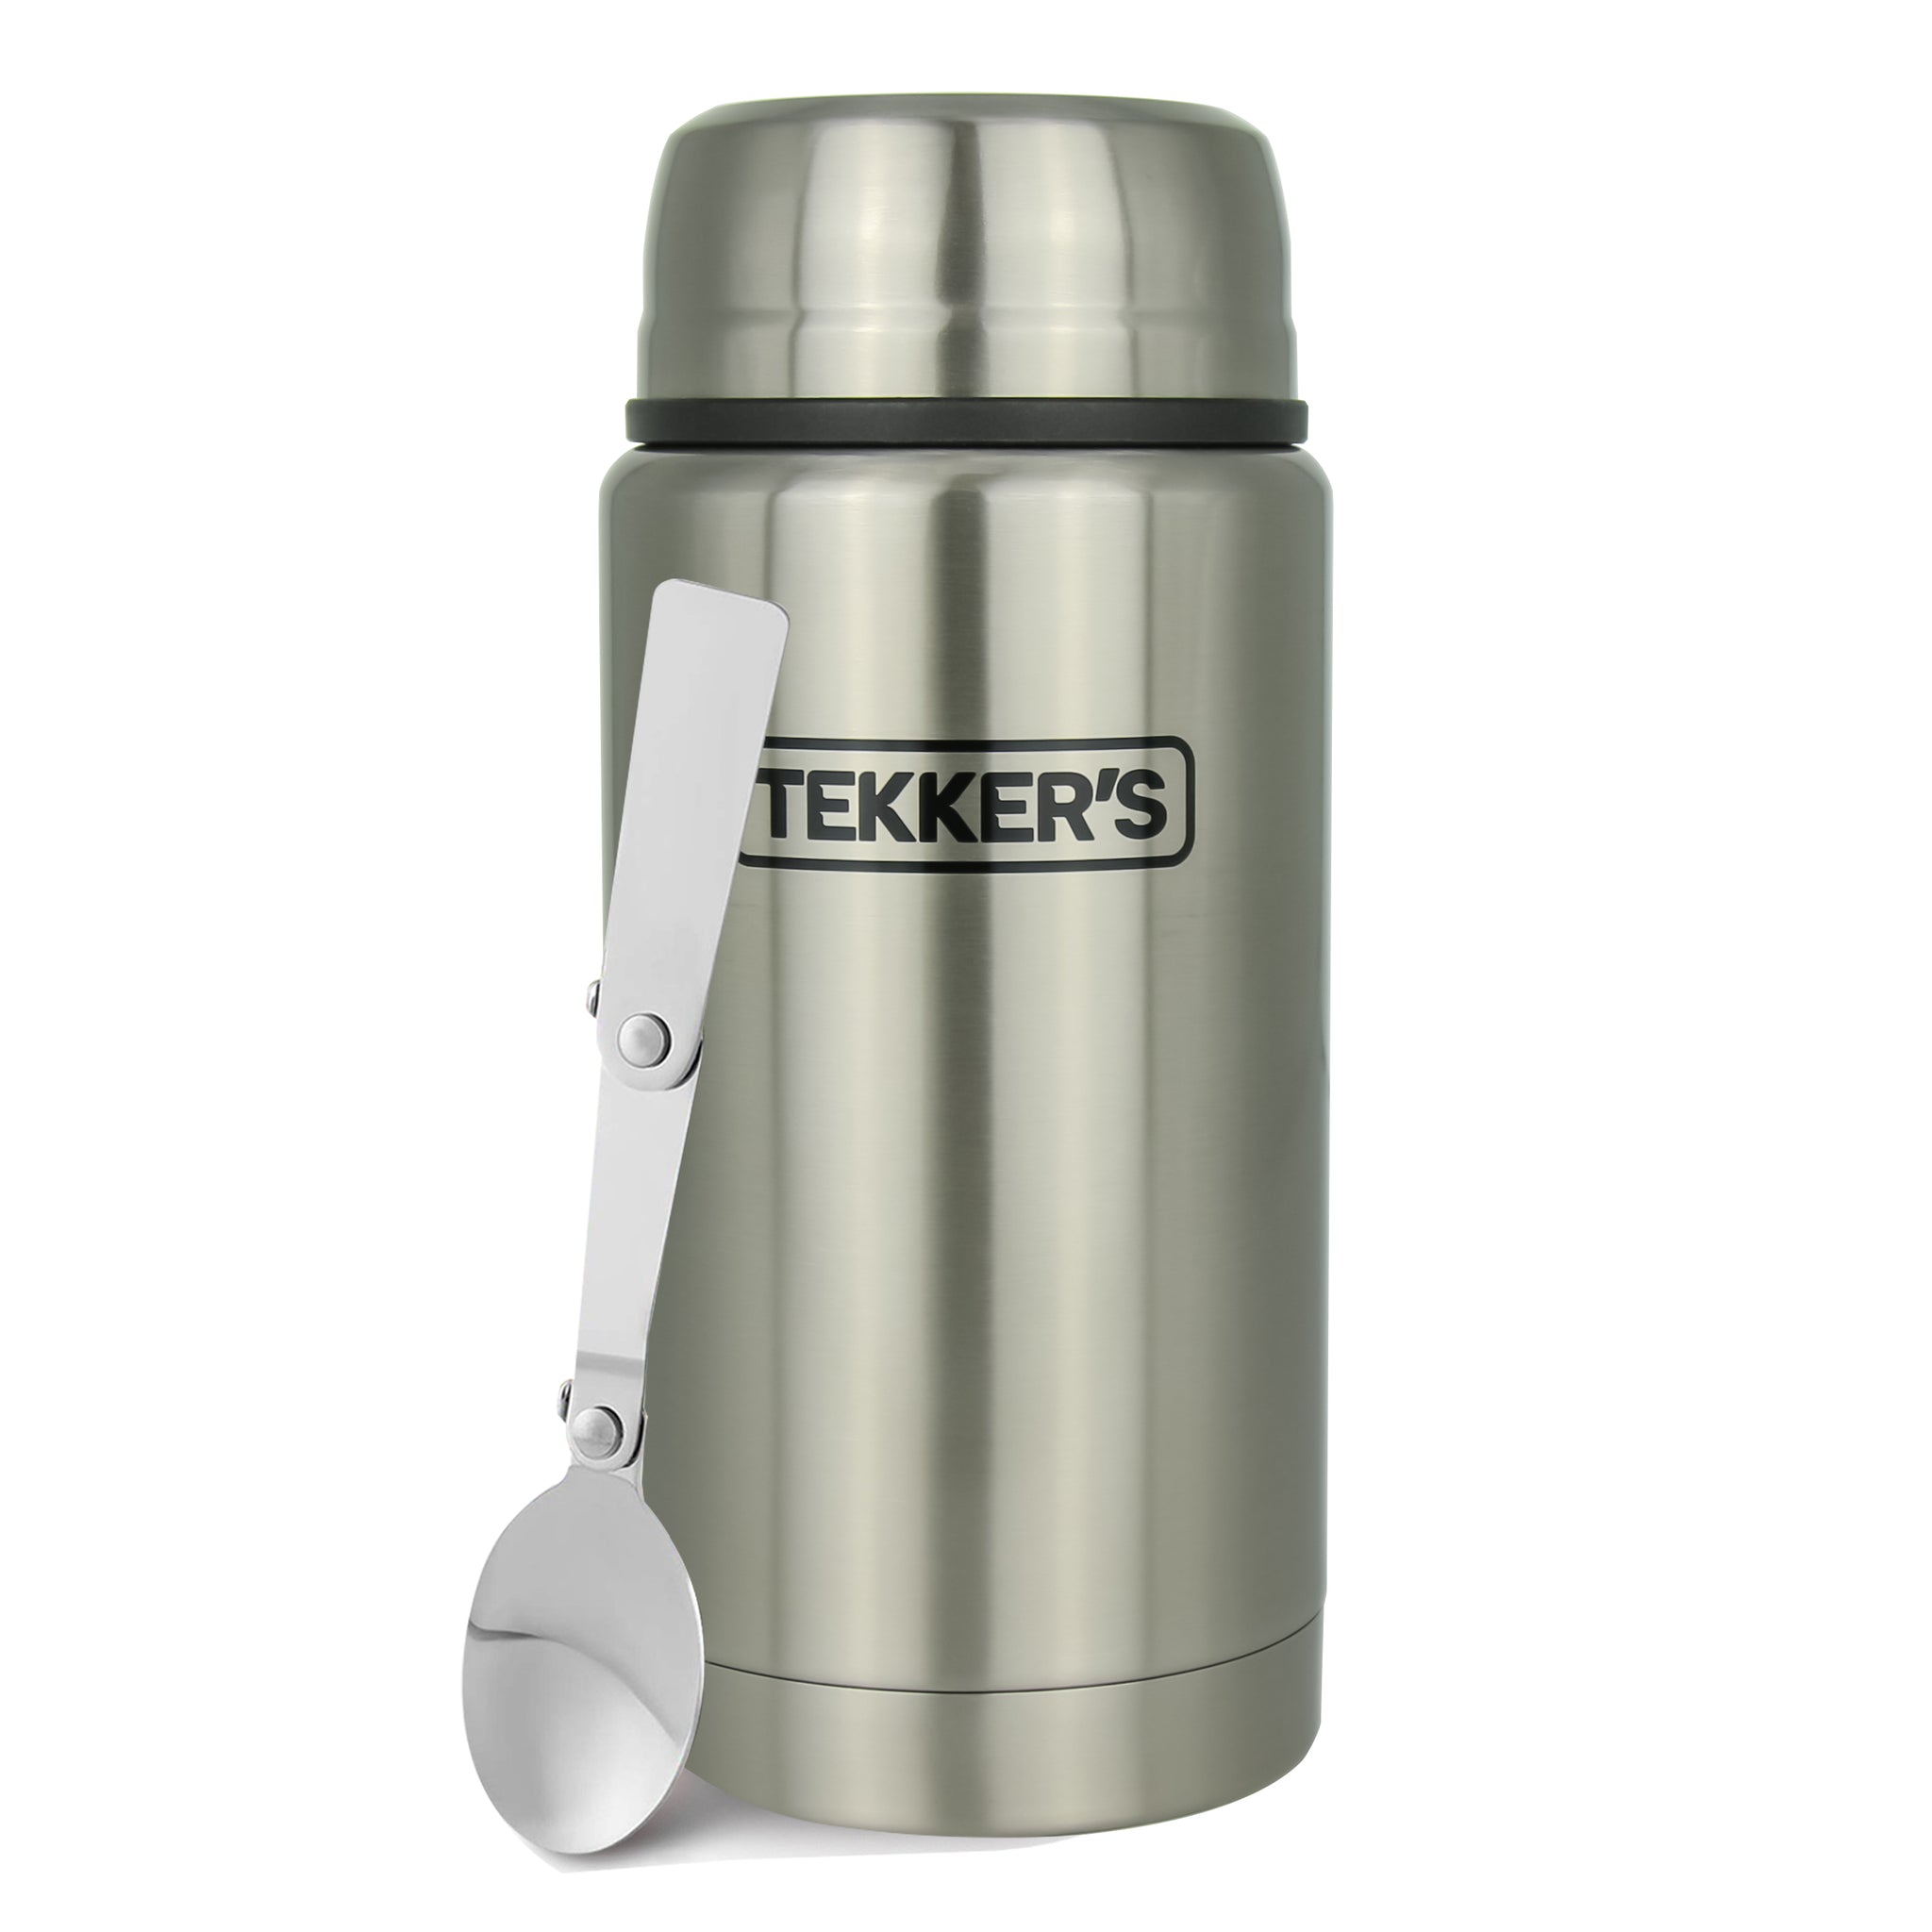 Leakproof Thermos For Hot Food, 17oz Stainless Steel Food Jar